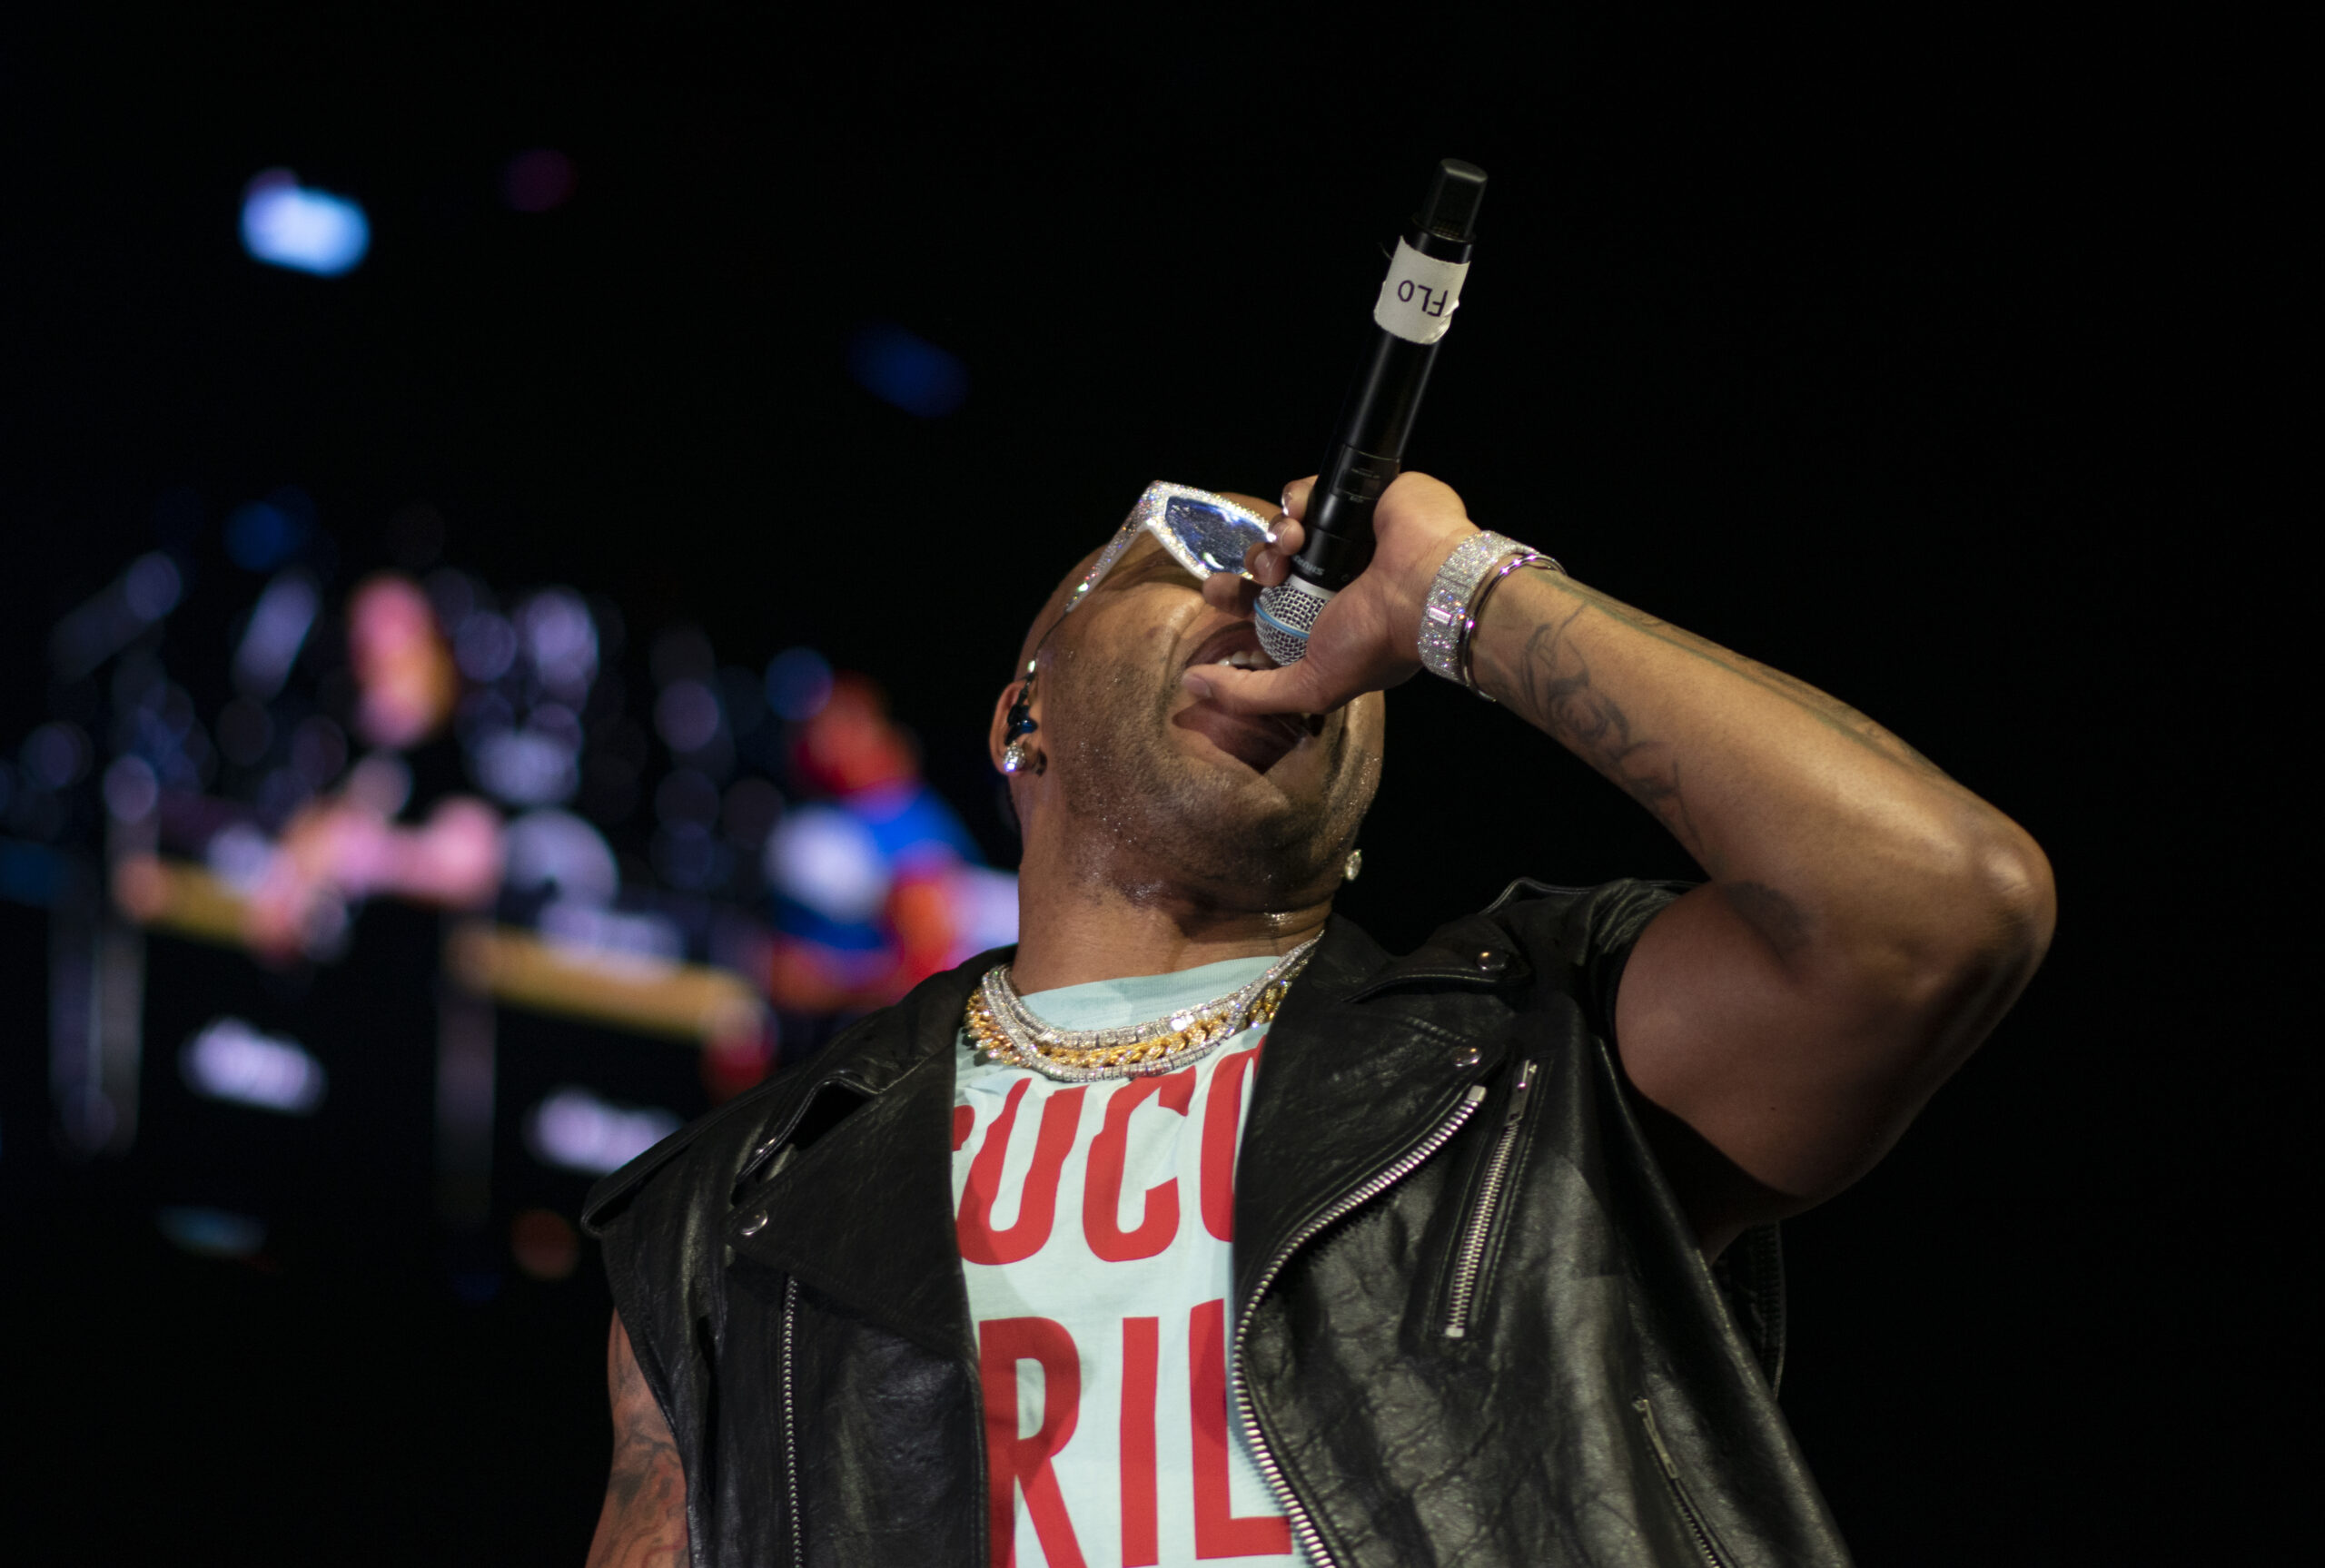 “What a Night:” Flo Rida welcomes students back to campus – PHOTOS